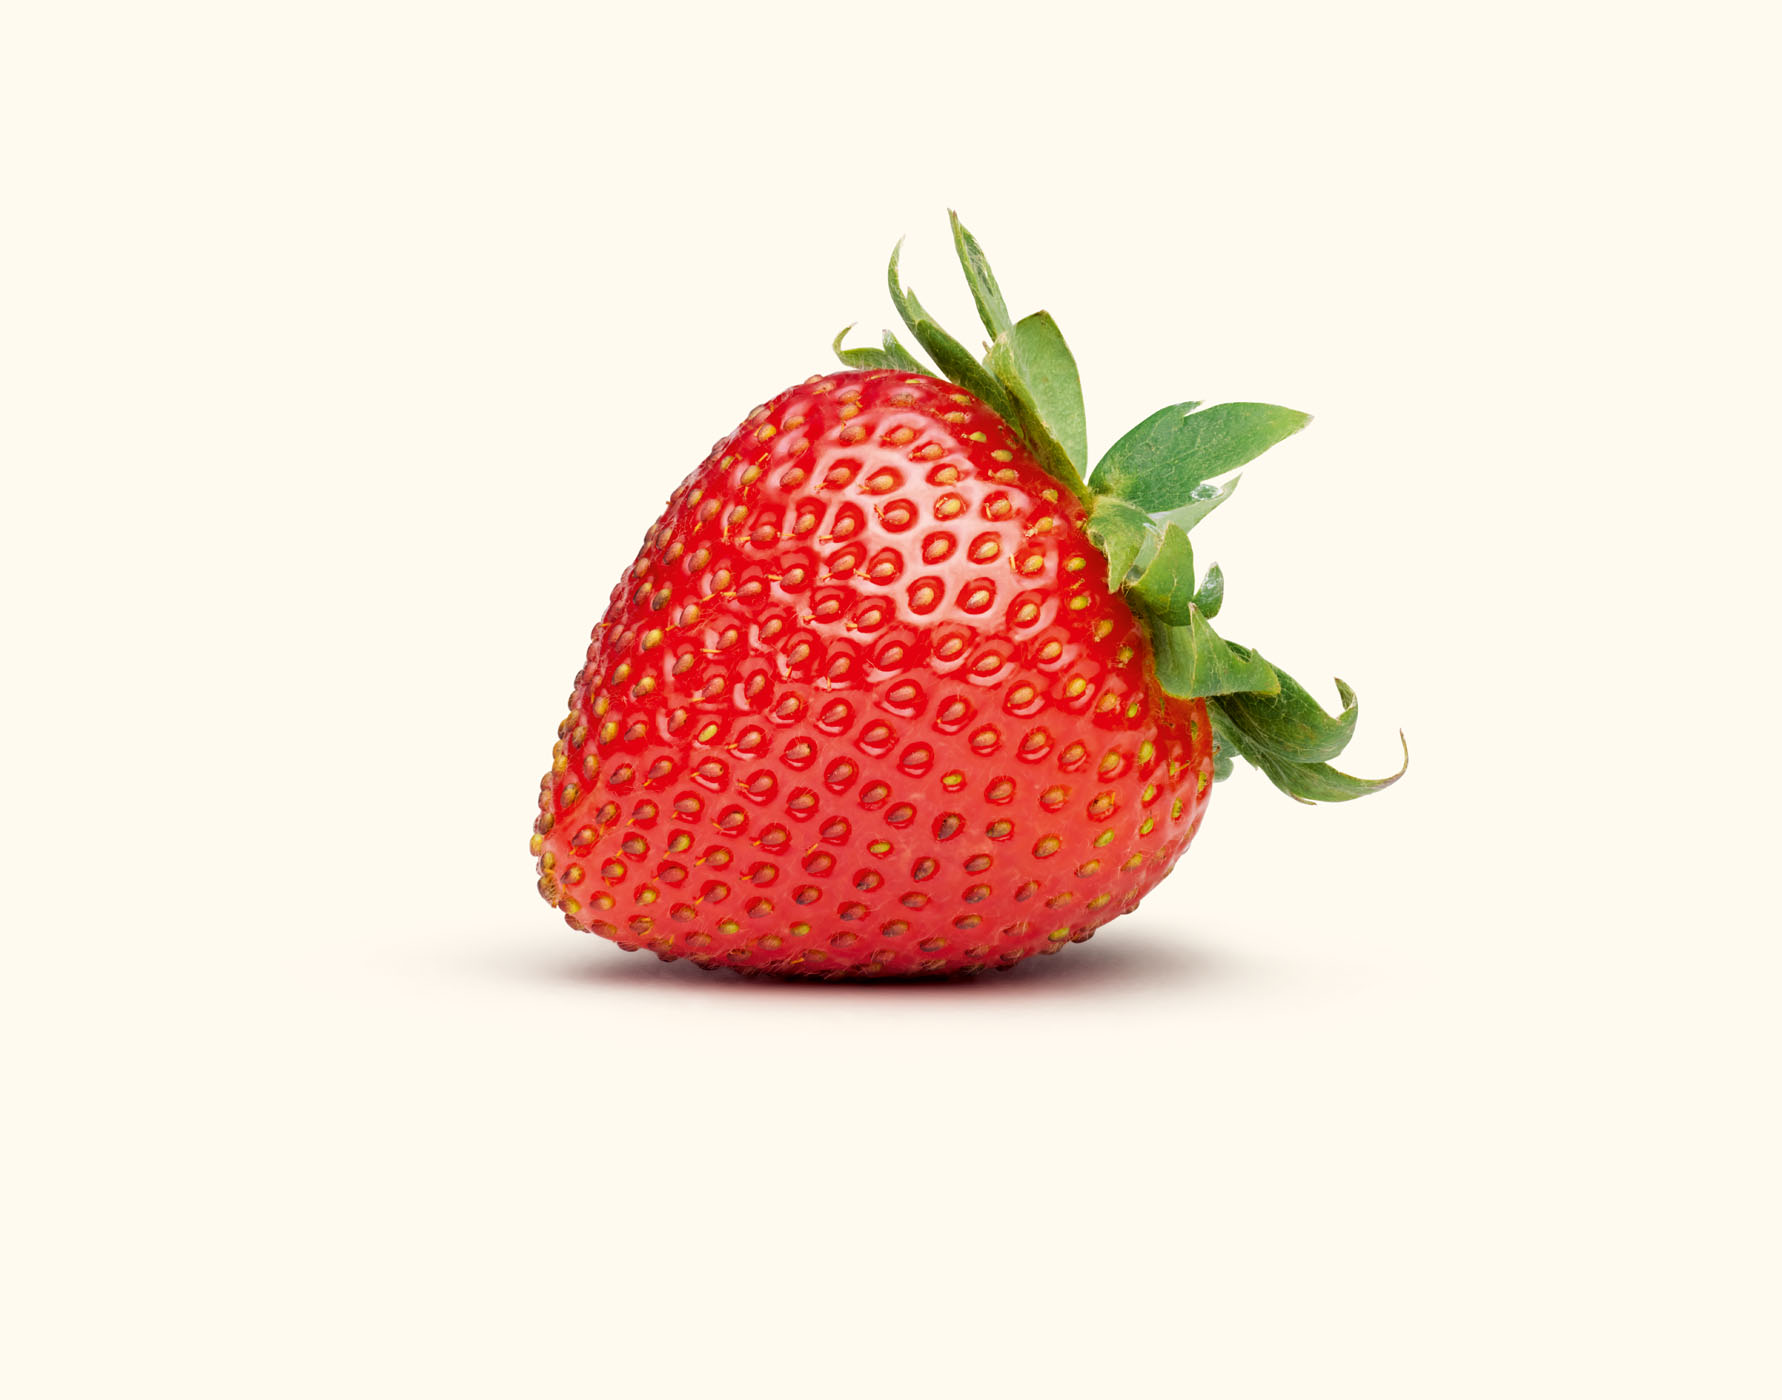 Tesco strawberry photo by Alexander Kent London based still life and product photographer.